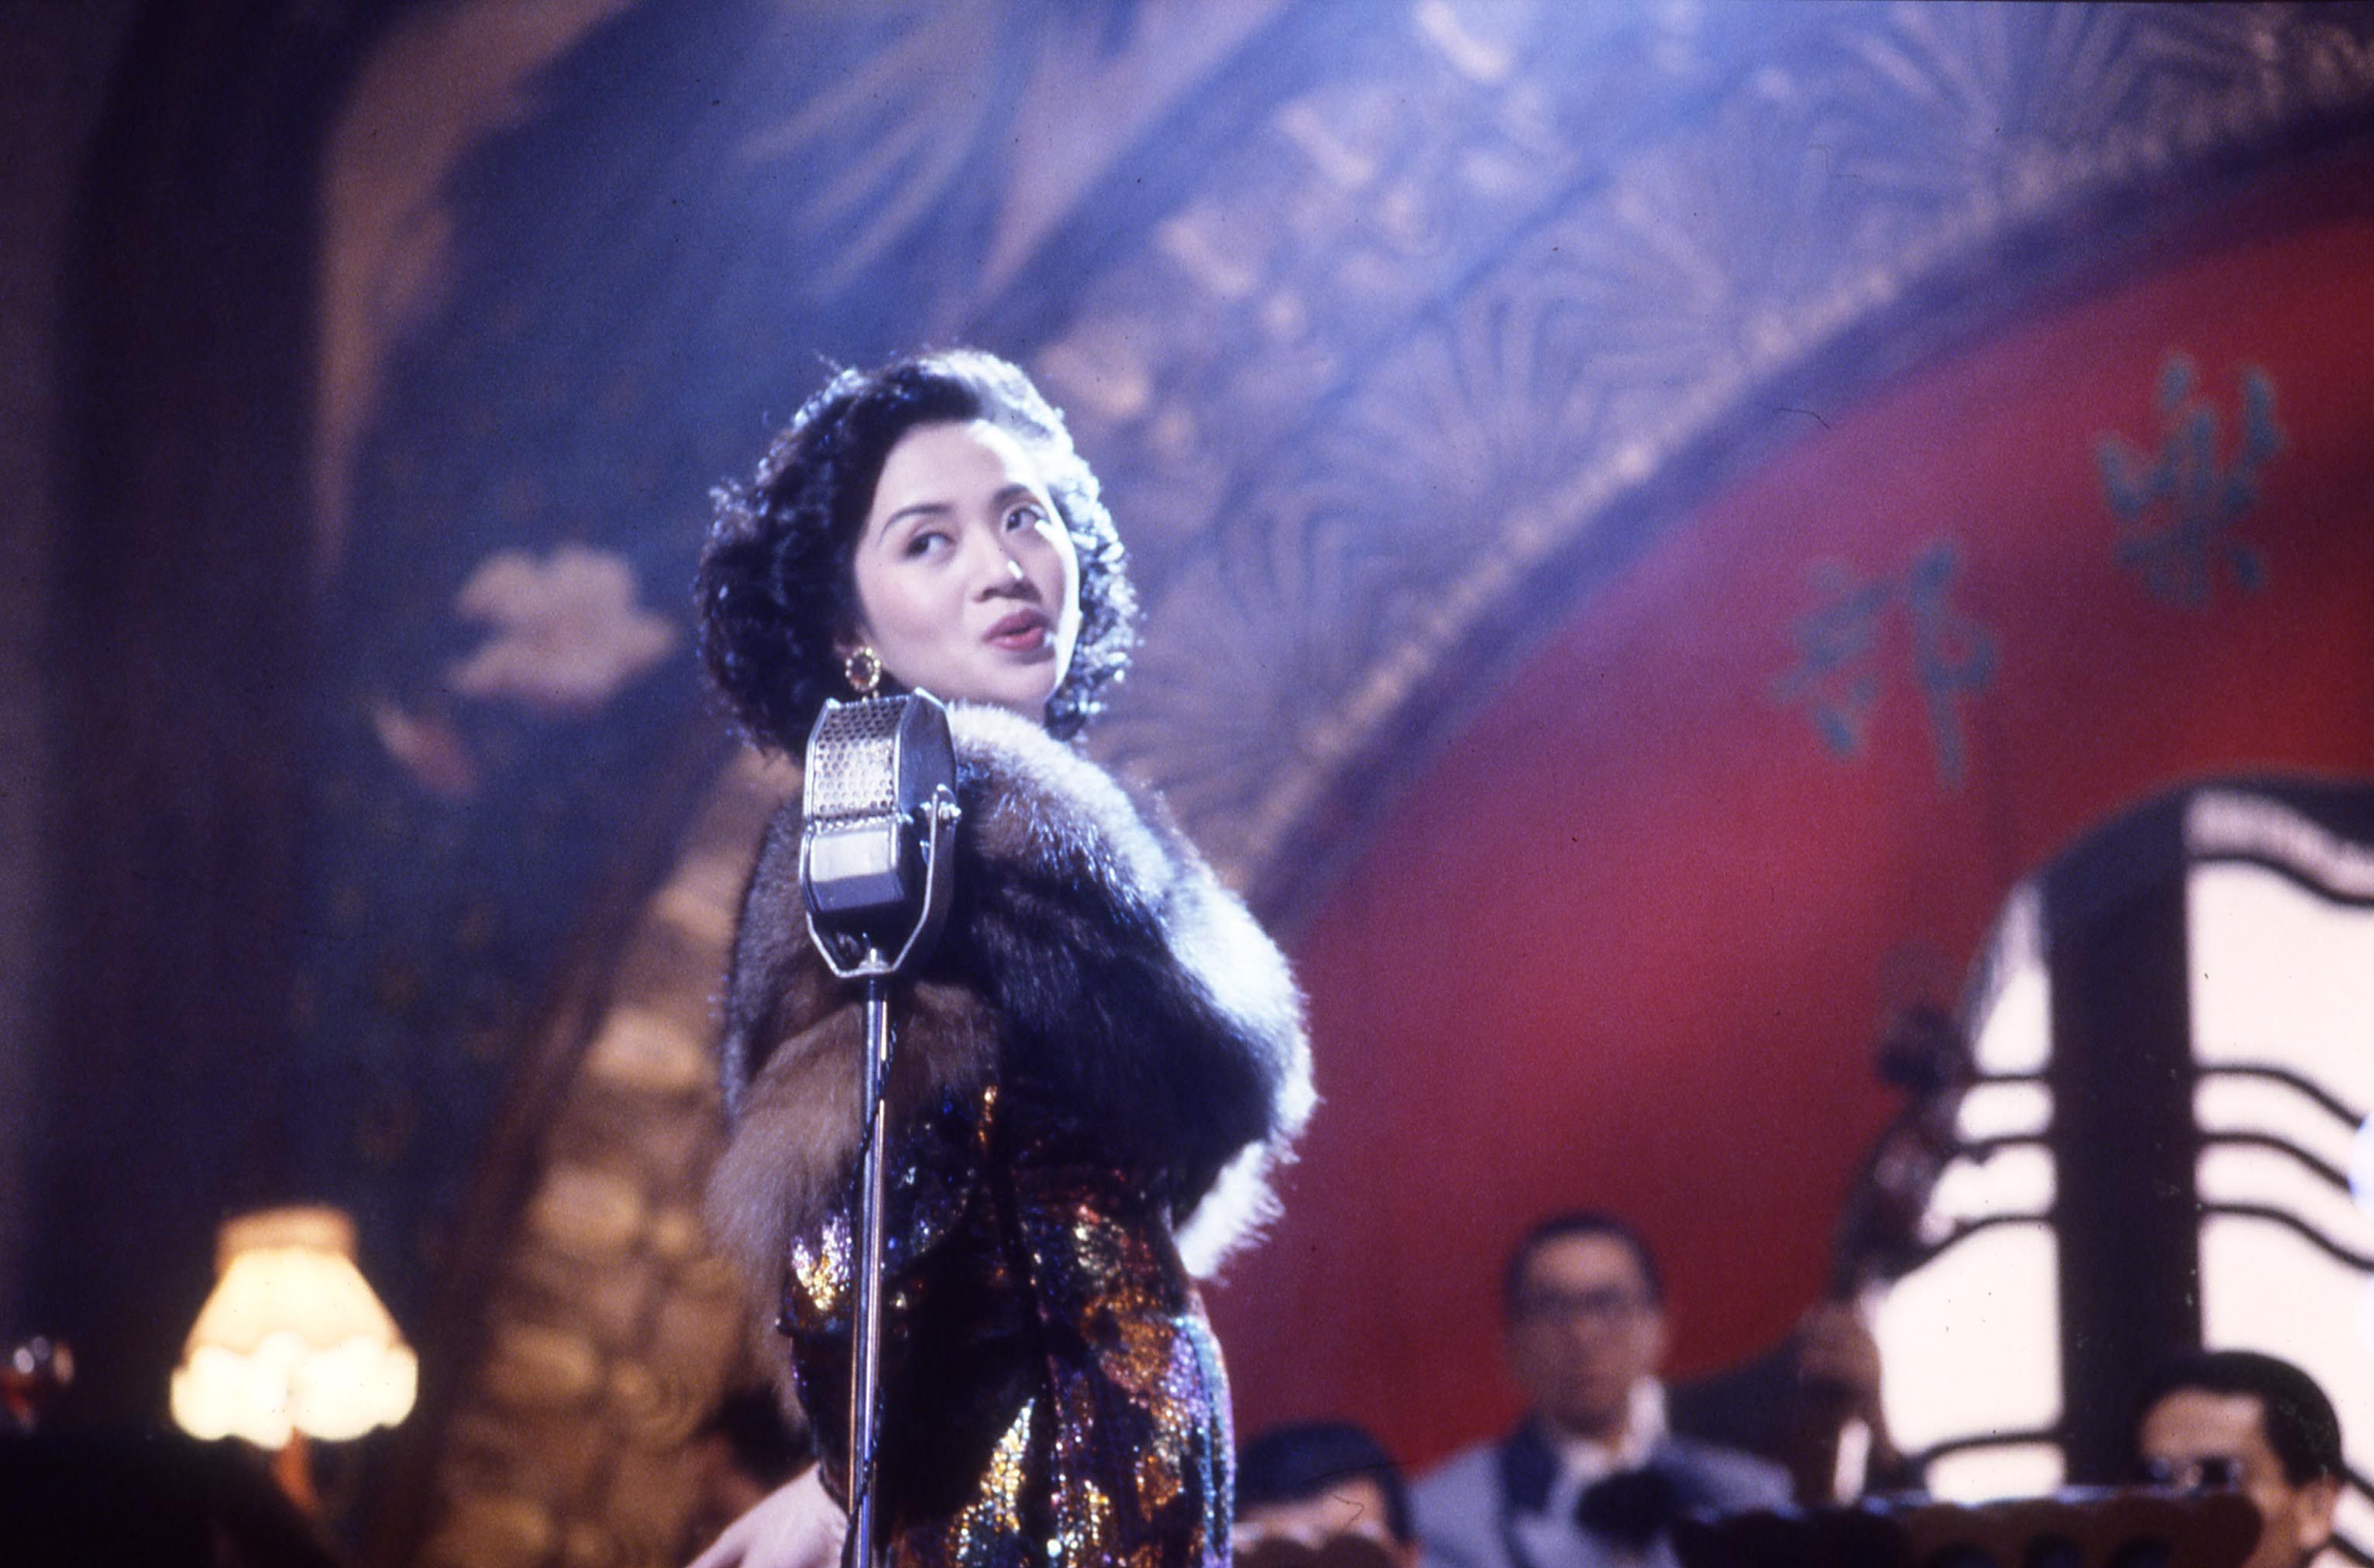 Anita Mui in a still from “Au Revoir, Mon Amour” (1991). A Canto-pop singer and actress, Mui, one of Hong Kong’s most revered stars, would have turned 60 on October 10 this year. Photo: Golden Harvest